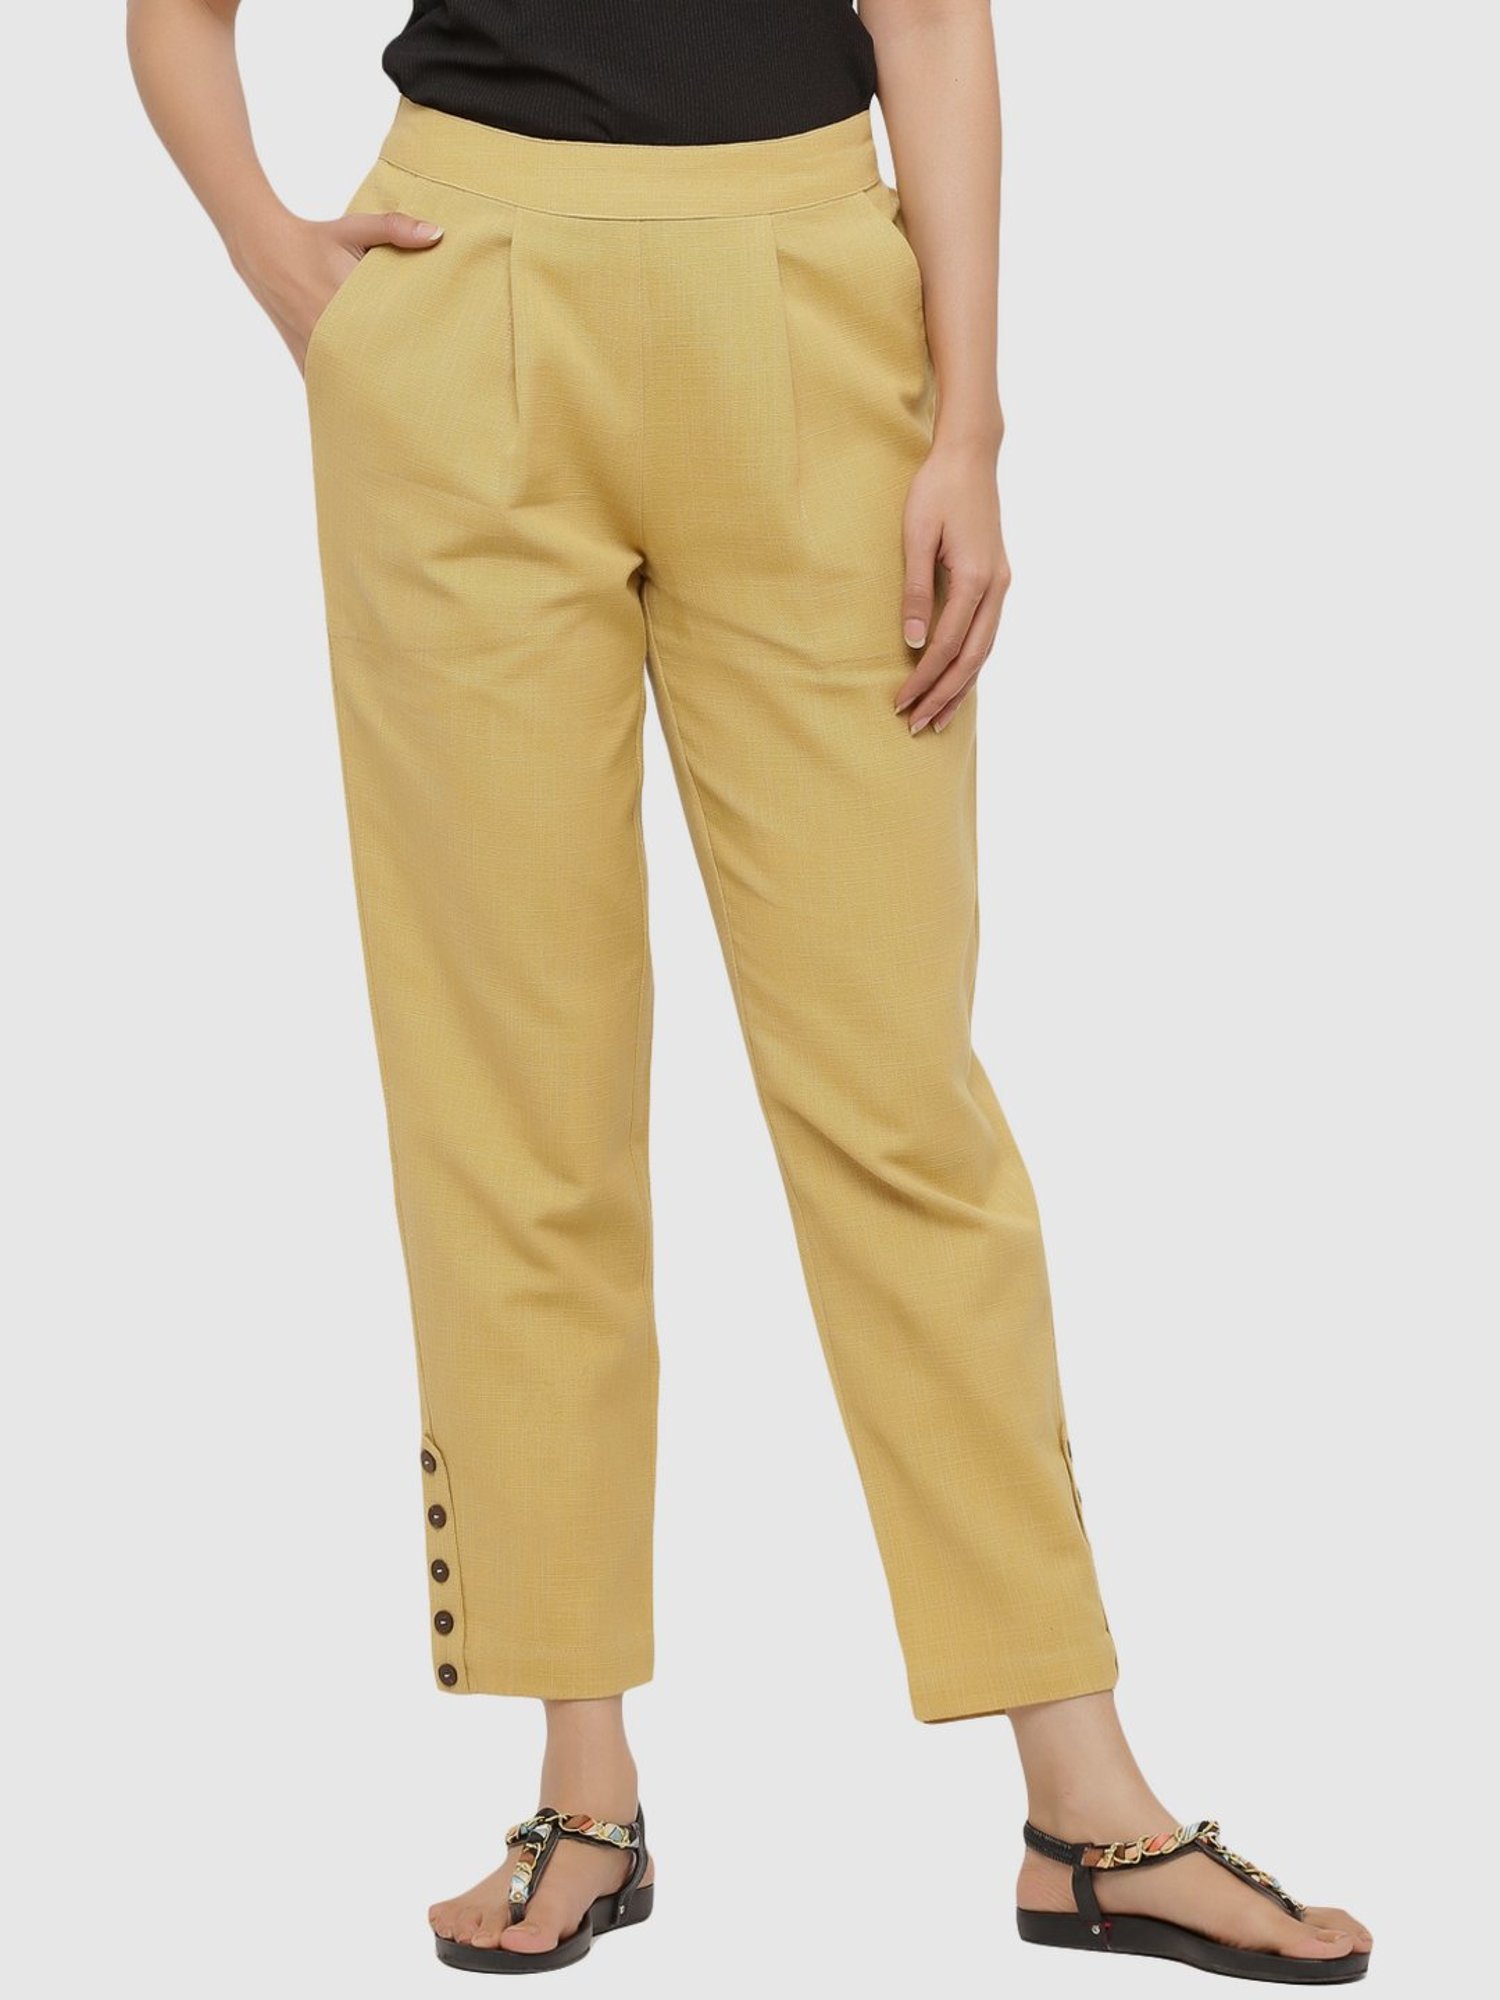 Buy Comfort Lady Women's Straight Fit Pants (2540_Beige_Plus Size) at  Amazon.in